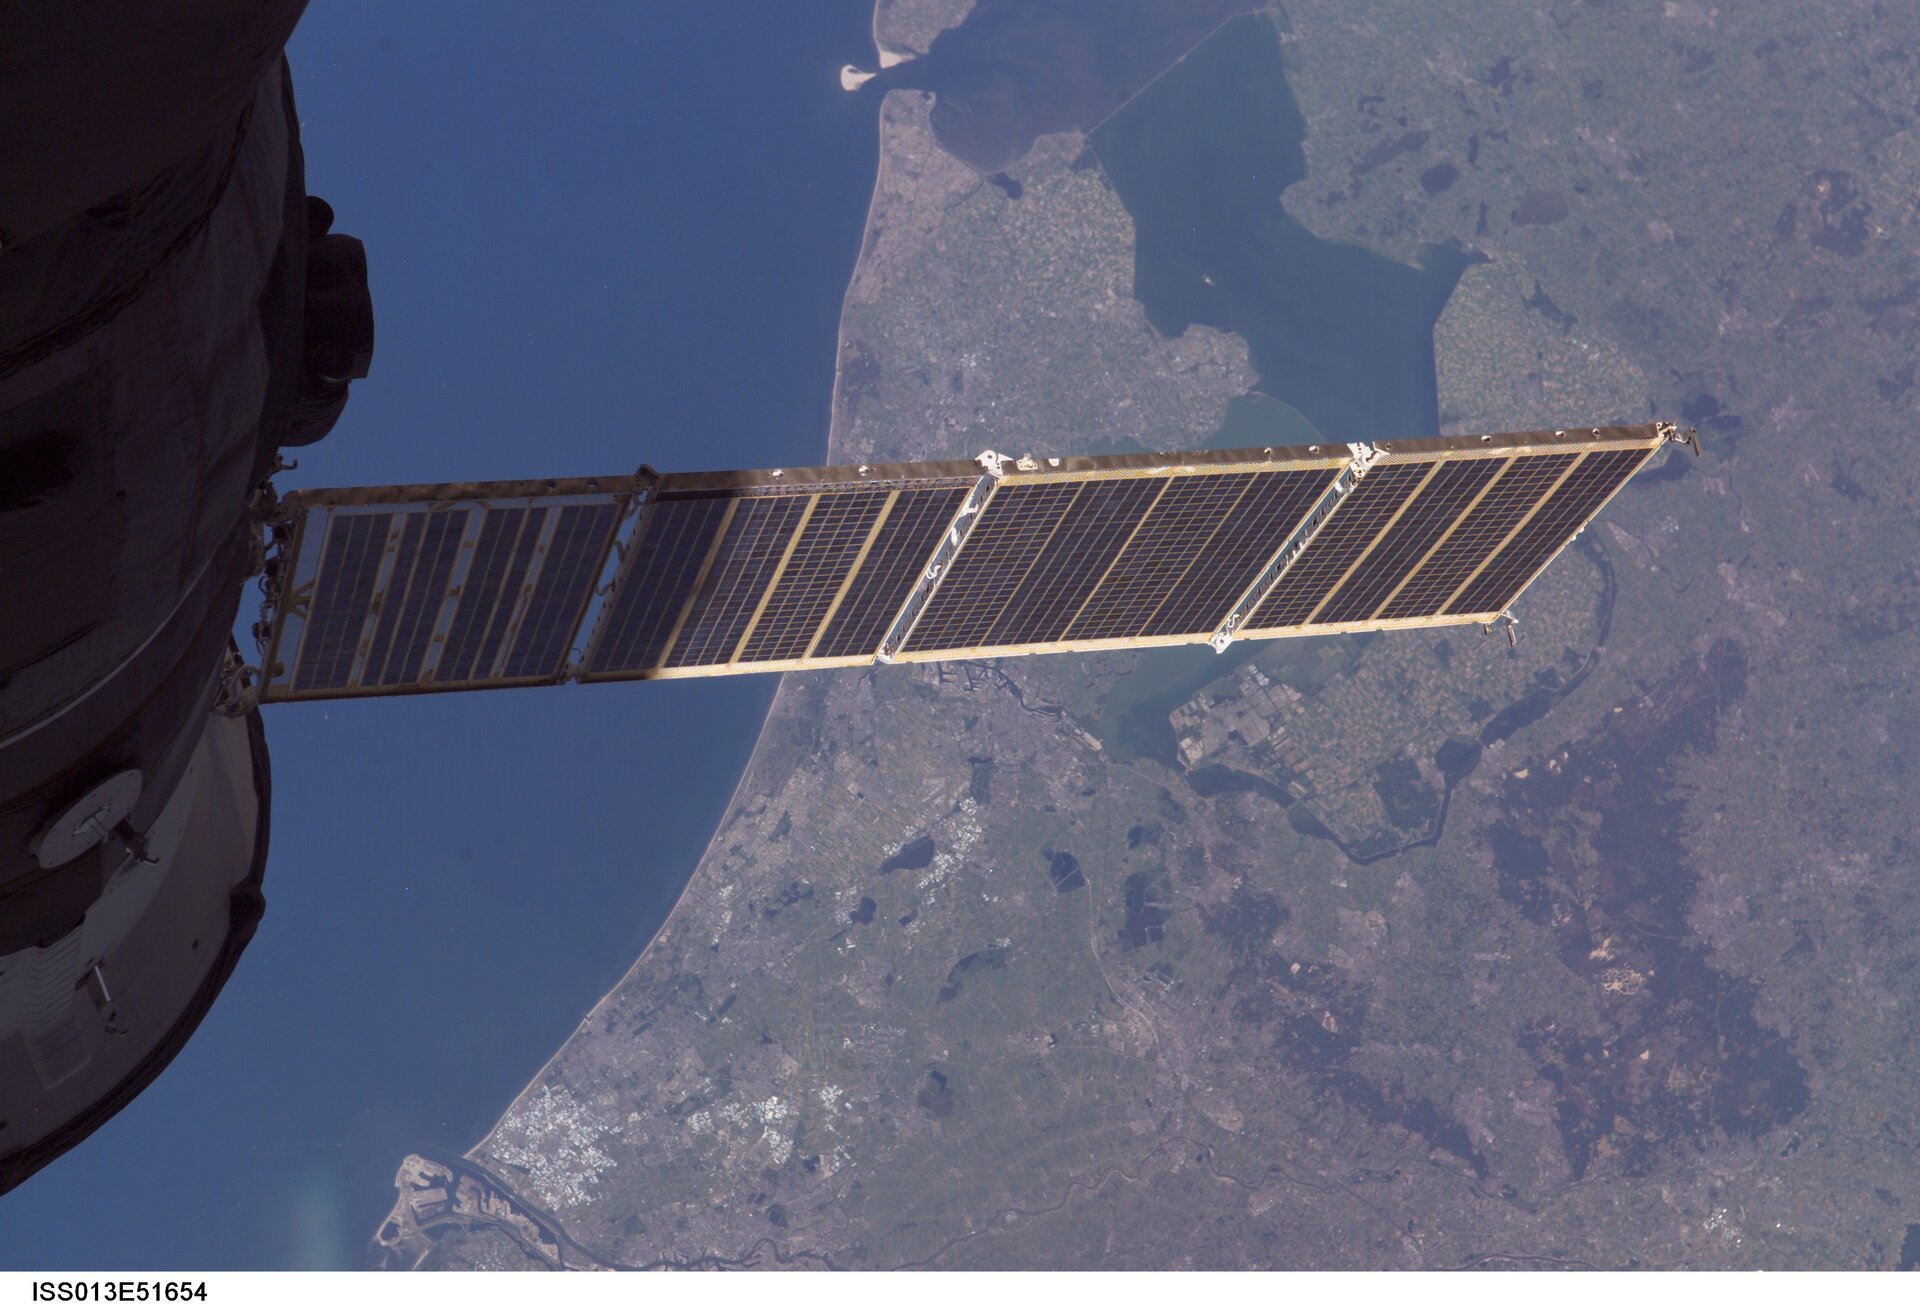 View of the Netherlands seen from the International Space Station